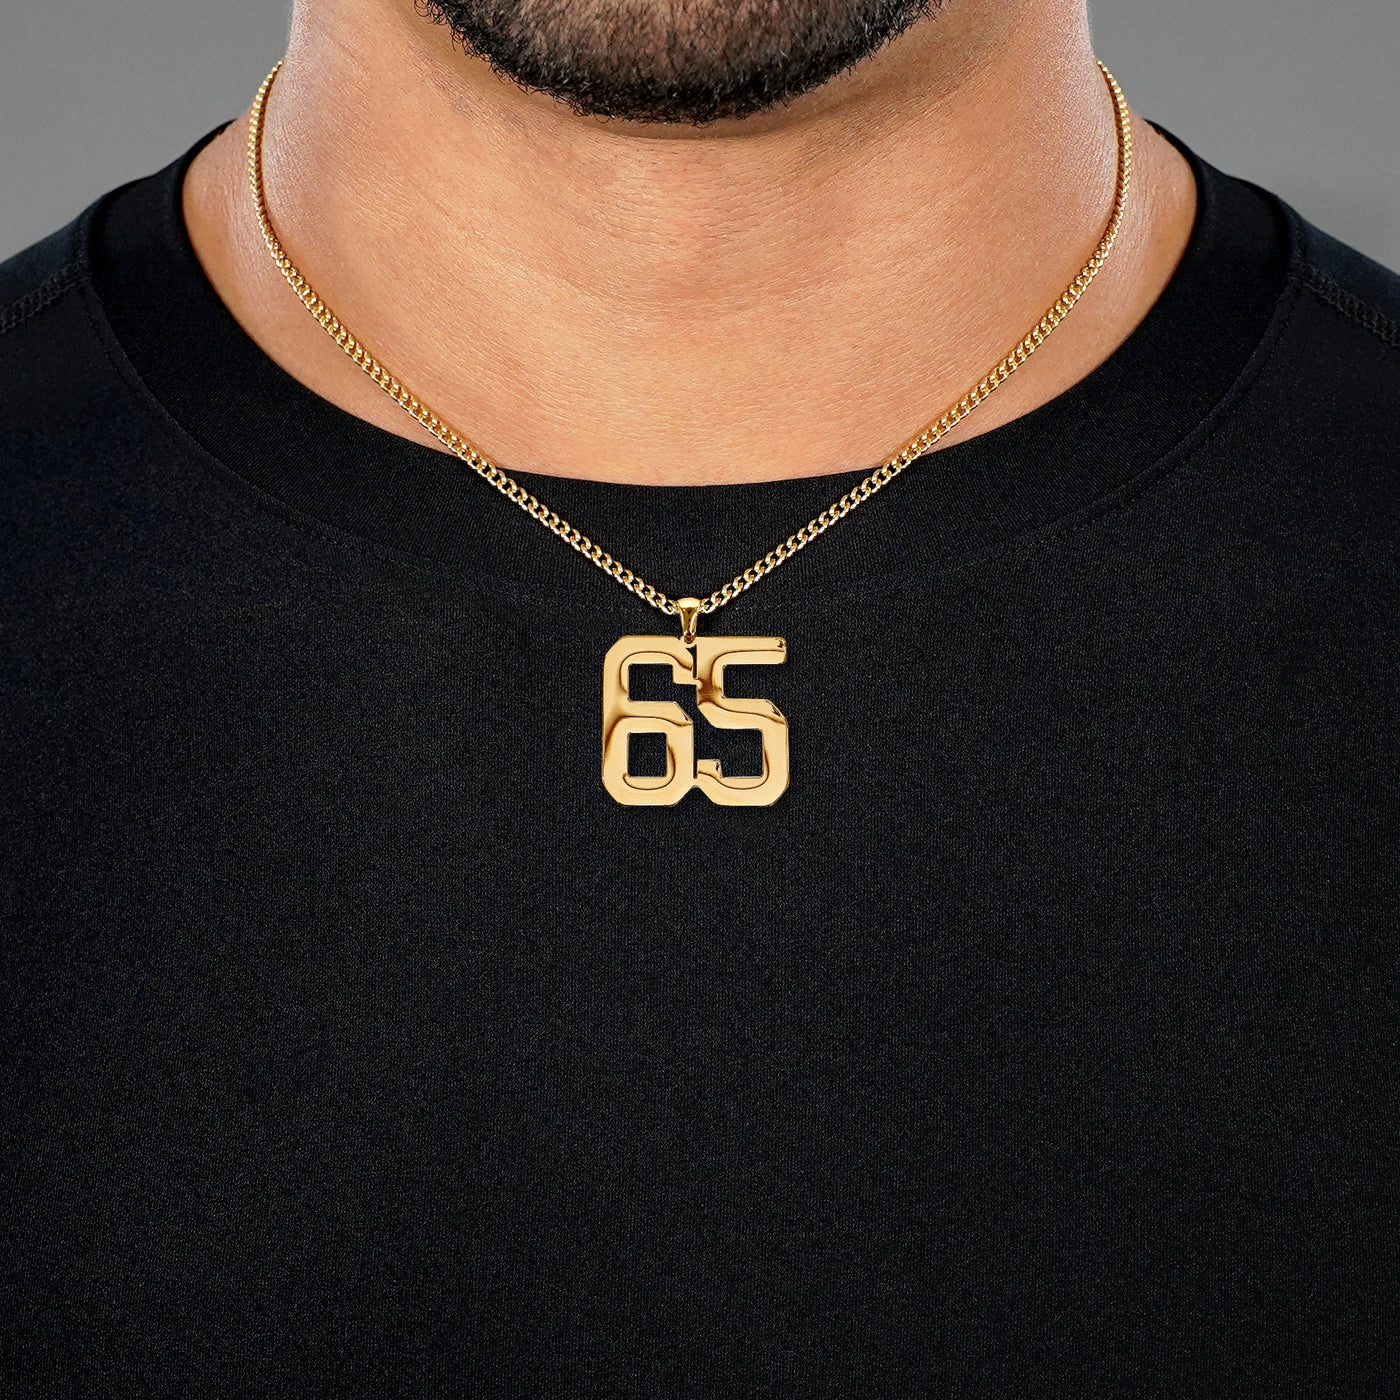 65 Number Pendant with Chain Necklace - Gold Plated Stainless Steel